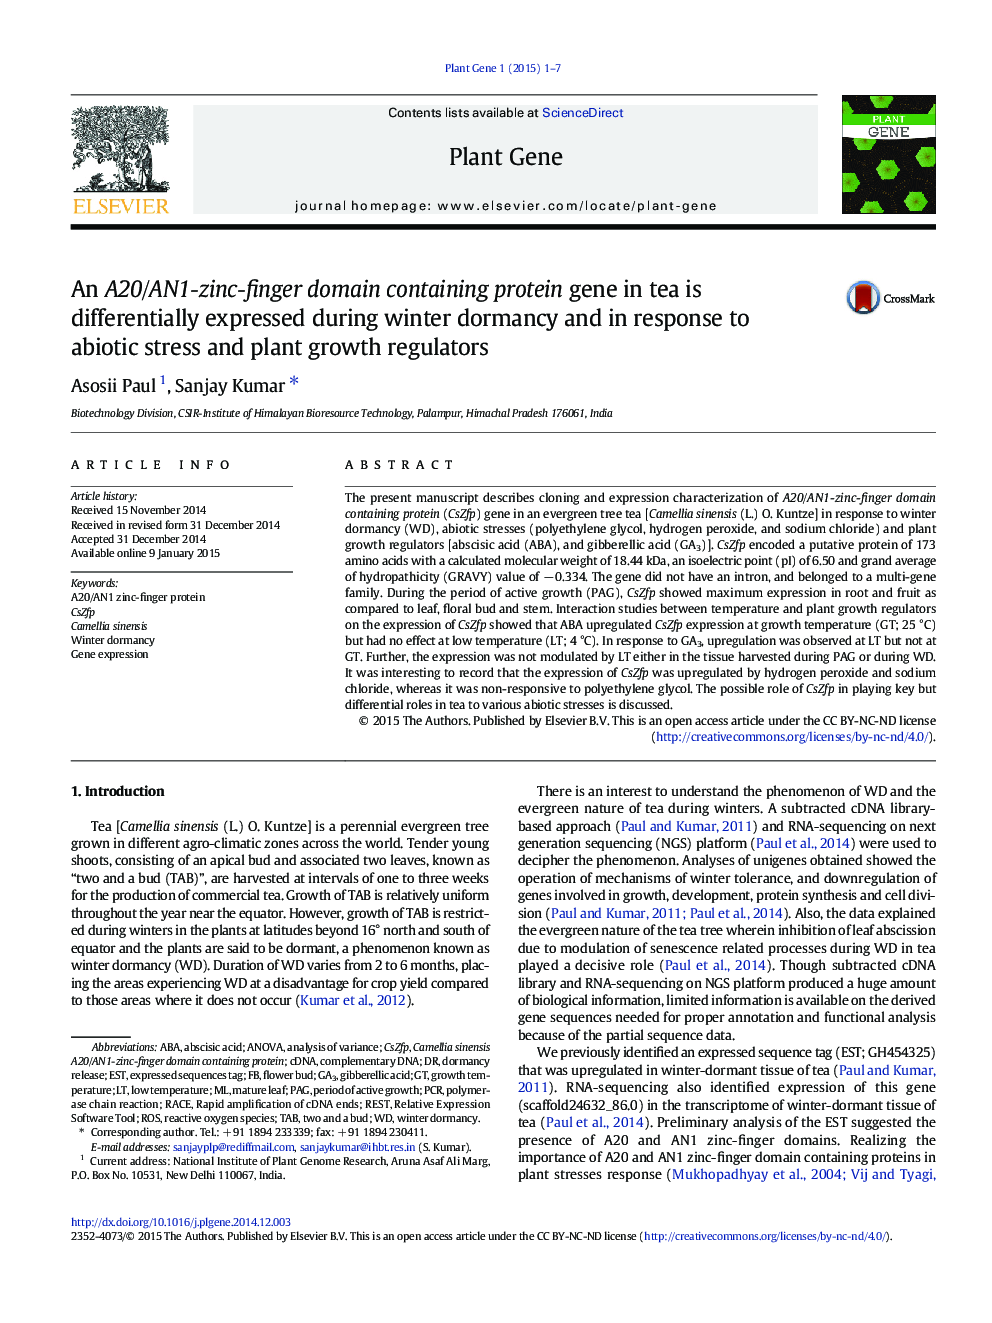 An A20/AN1-zinc-finger domain containing protein gene in tea is differentially expressed during winter dormancy and in response to abiotic stress and plant growth regulators